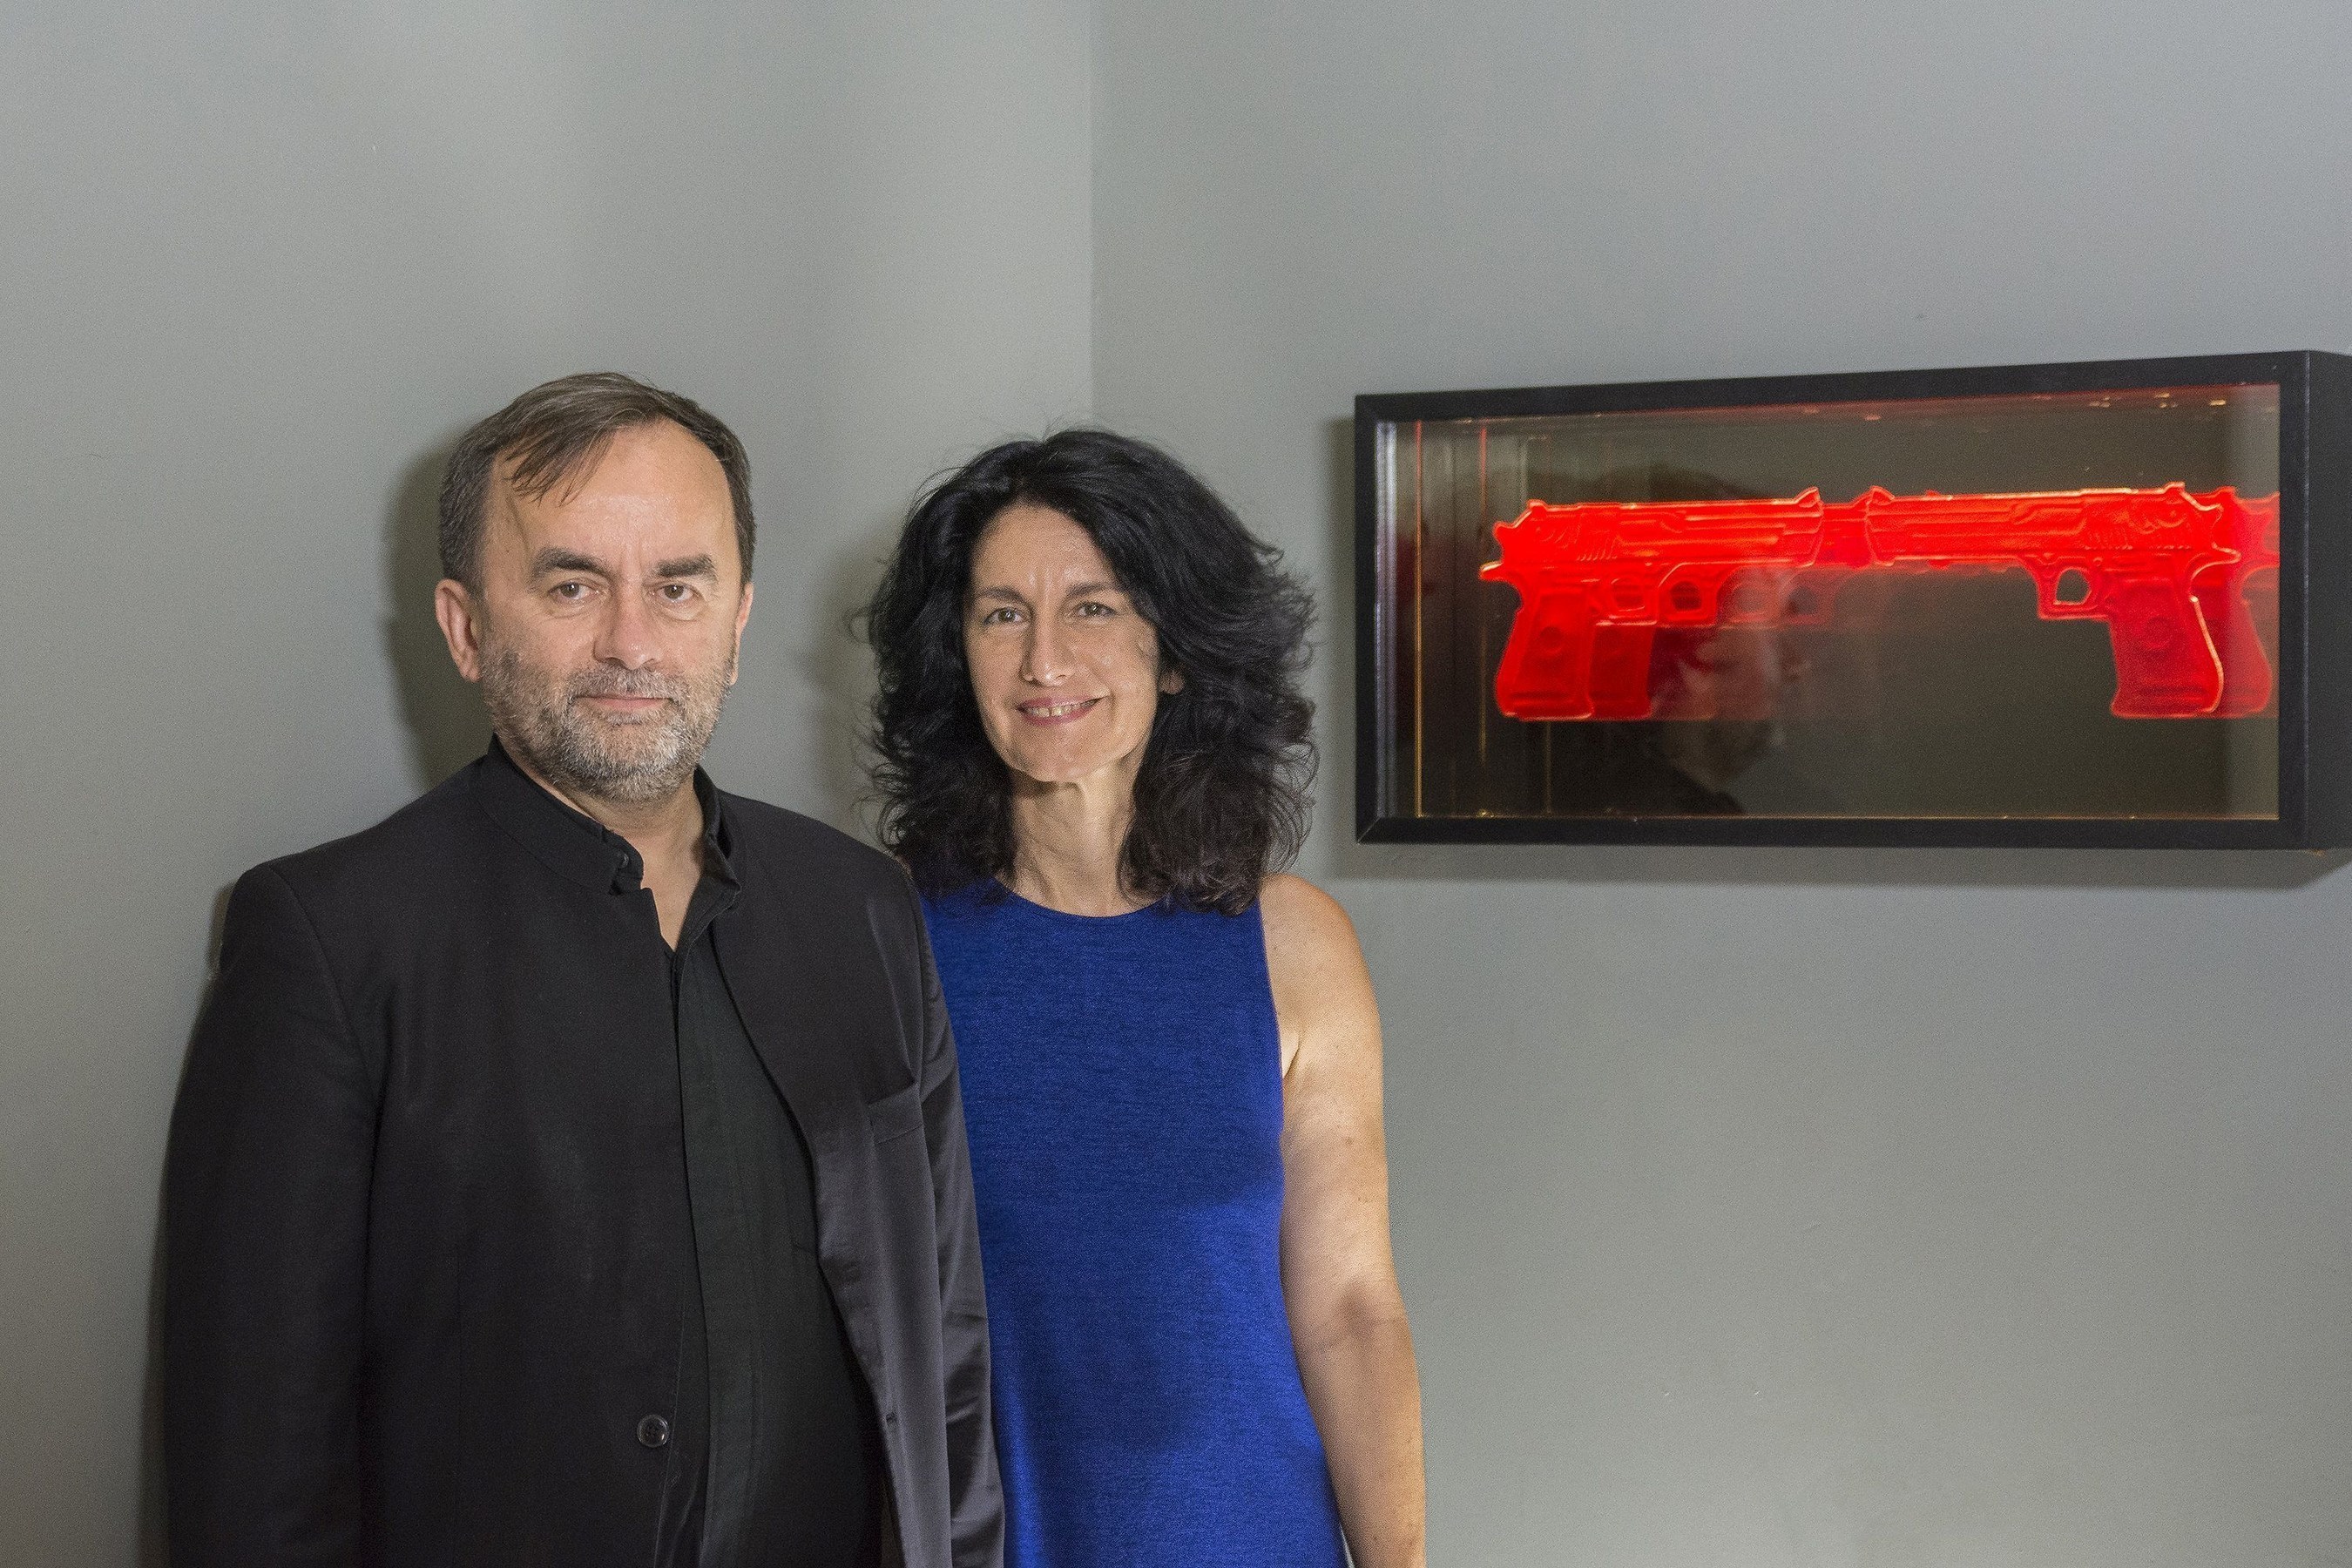 Mr. Patrick Desbois, president and founder of Yahad-In Unum, standing with Israel artist Mira Maylor, whose art is featured in the exhibit "Memory of the Holocaust Through Art," at the Museo de Holocausto, founded by Yahad-In Unum, in Guatemala.